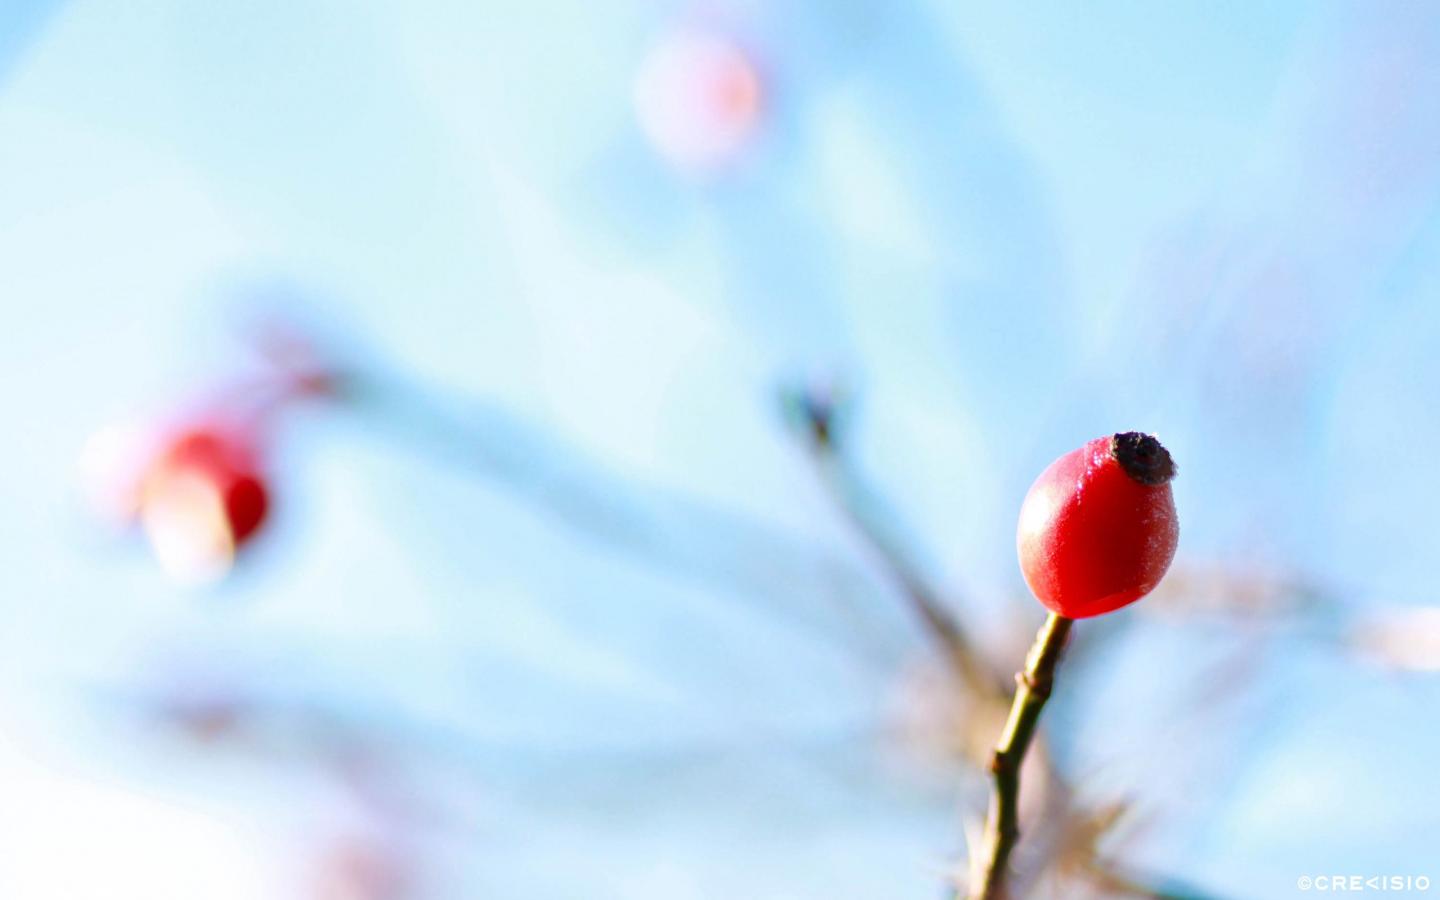 Frosty Rose Hips by Crevisio